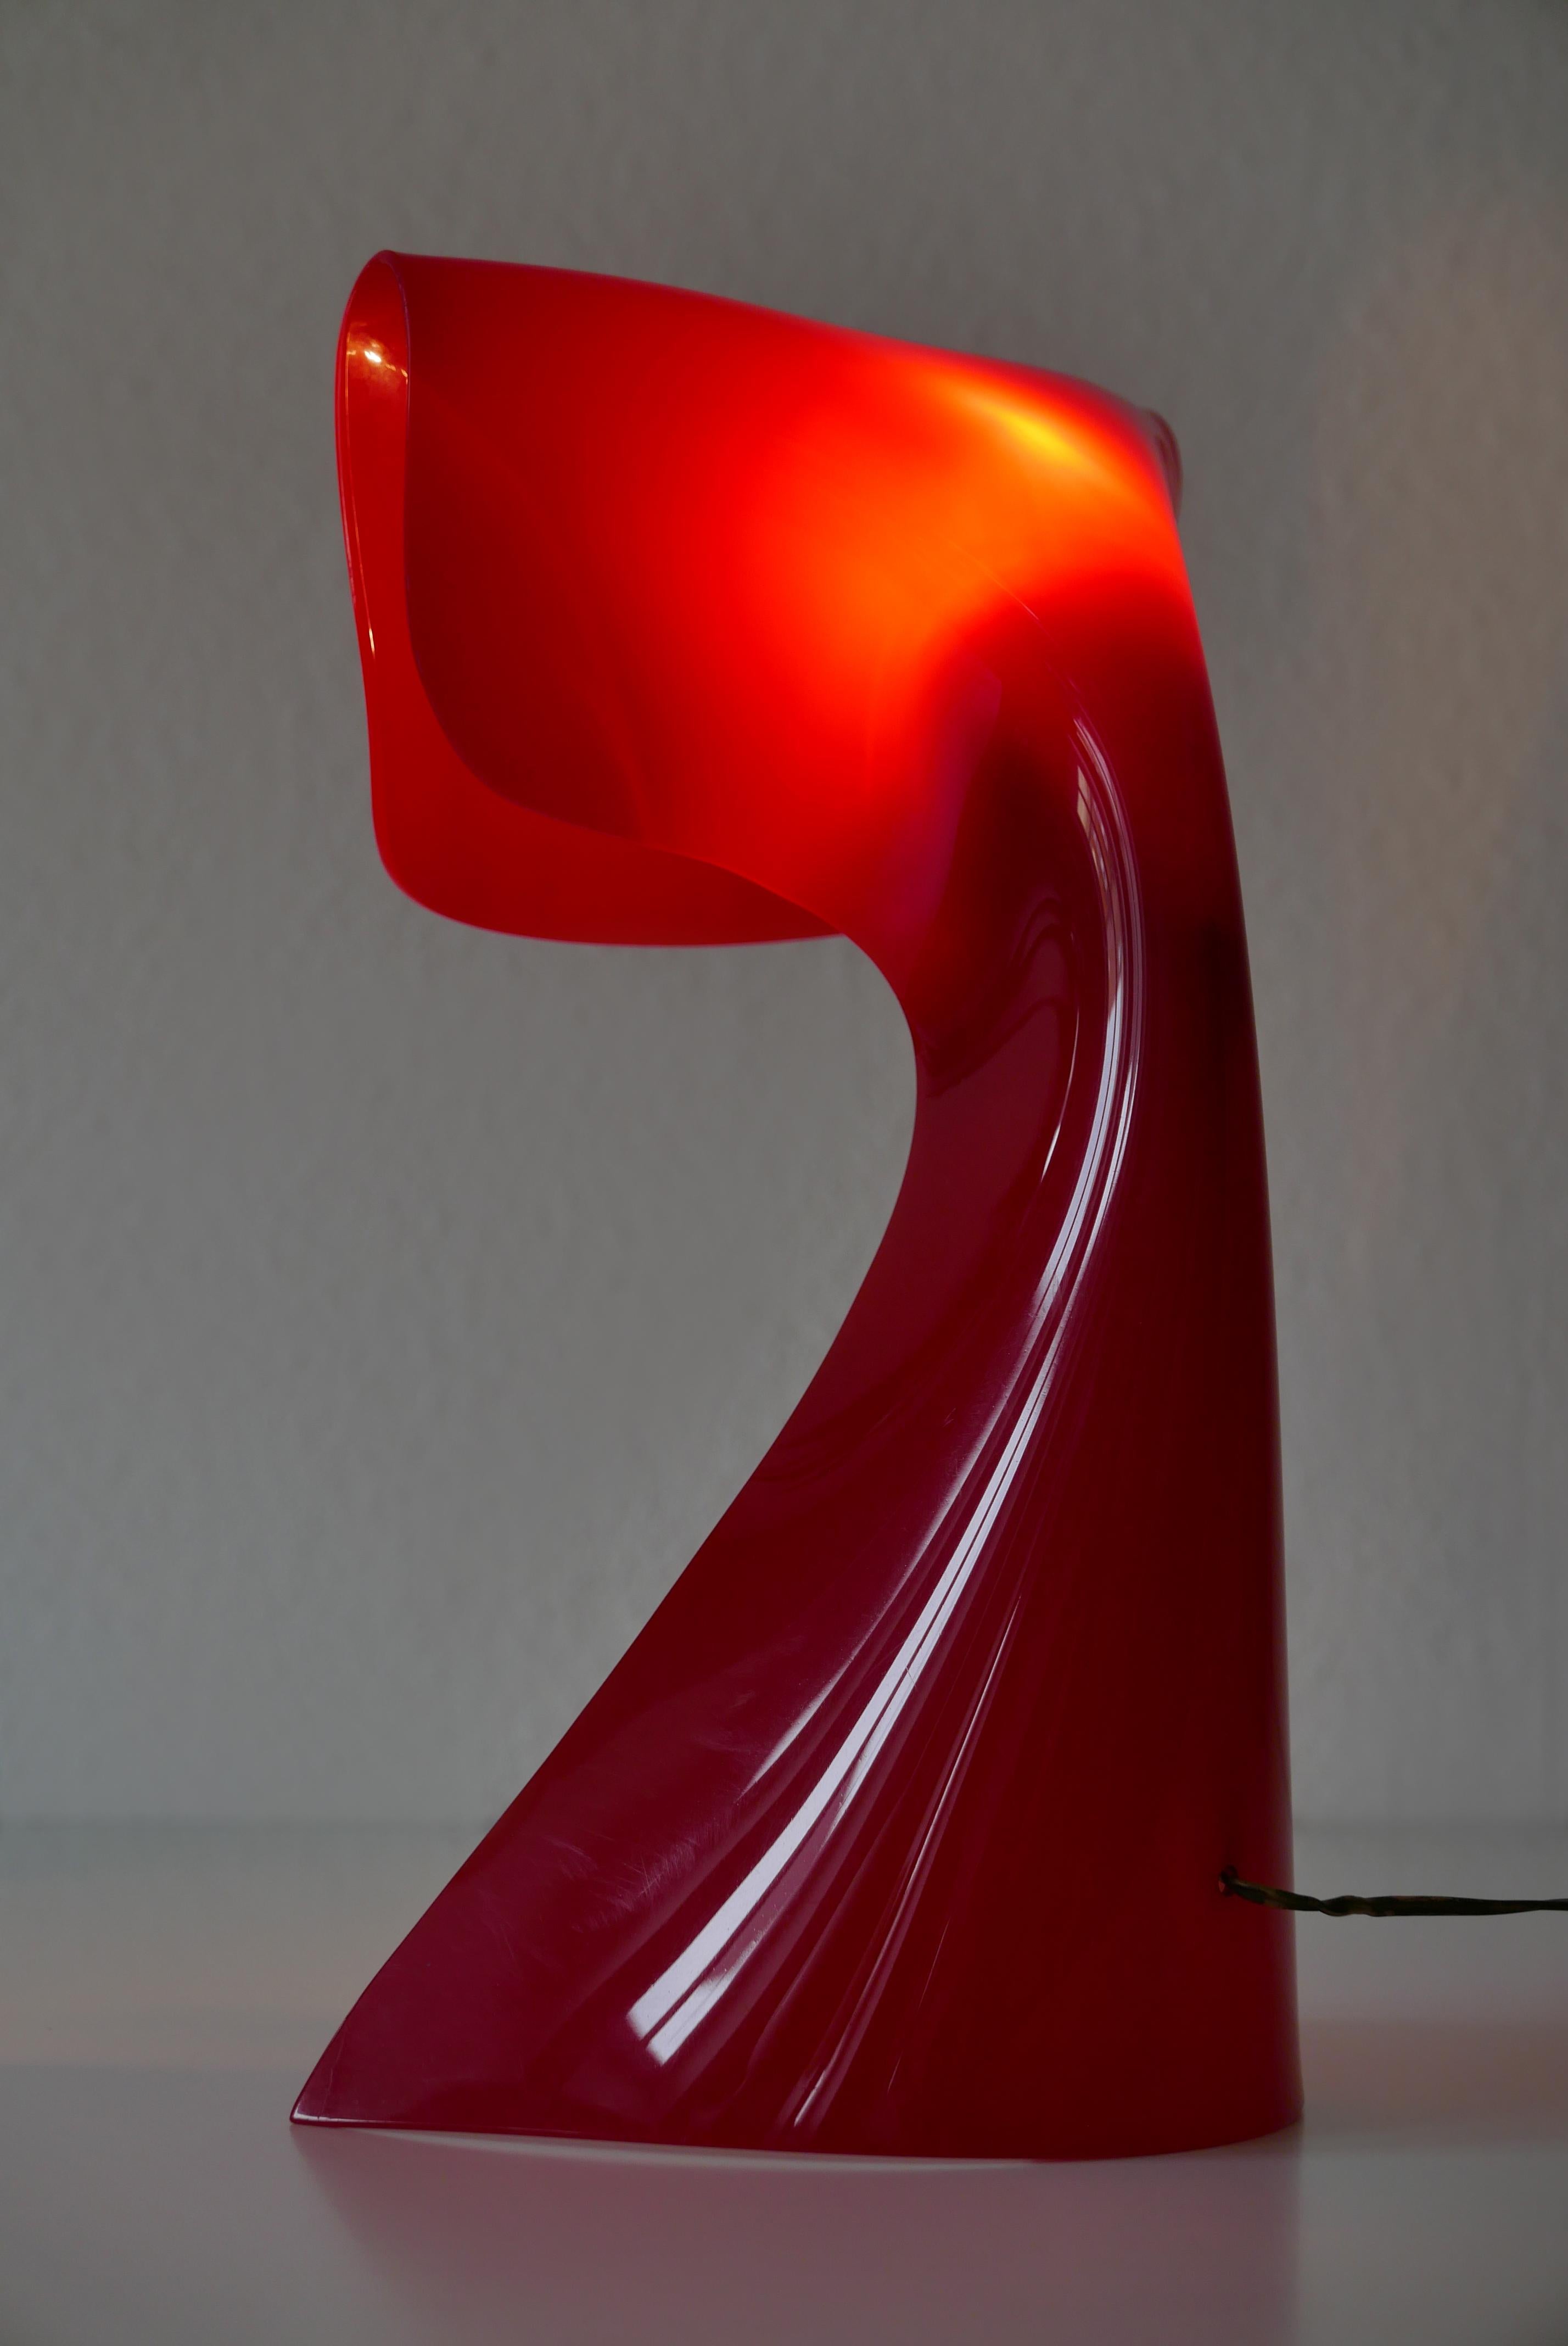 Mid-20th Century Exceptional Table Lamp by Hanns Hoffmann-Lederer for Heinz Hecht, 1950s, Germany For Sale